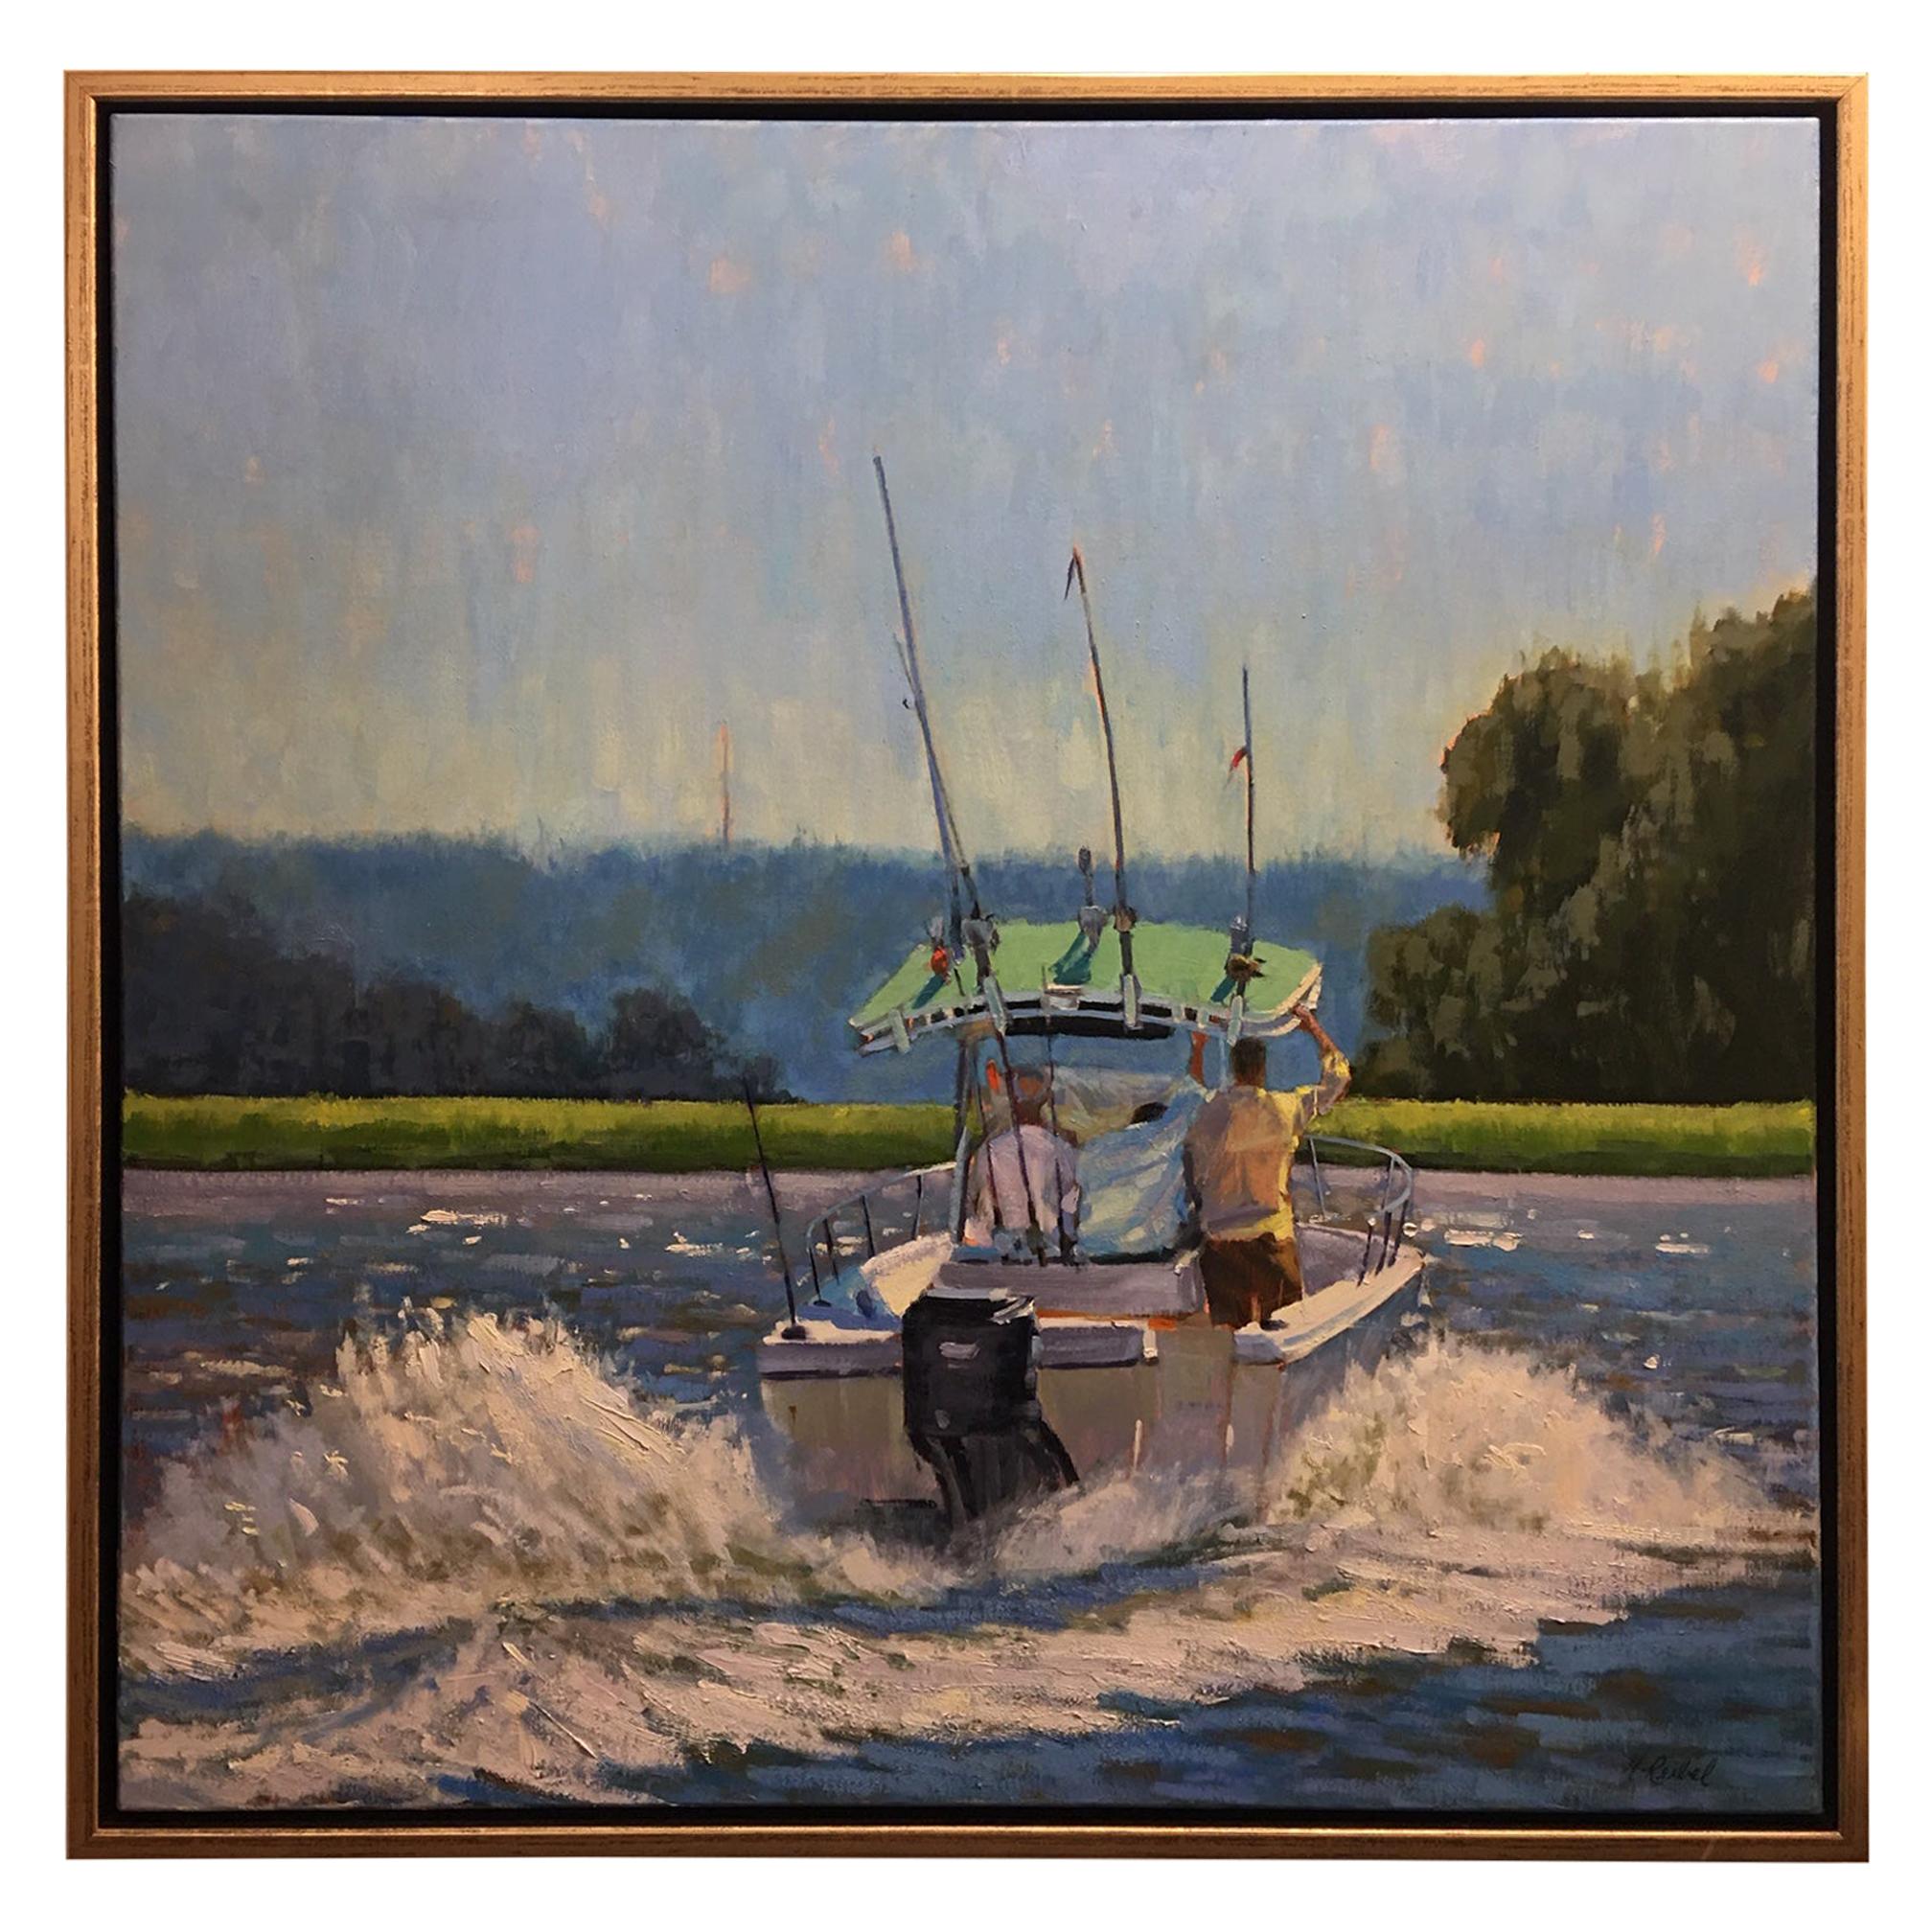 Oil on Canvas Painting "Boys Day Out", Boating Scene, Michael Reibel